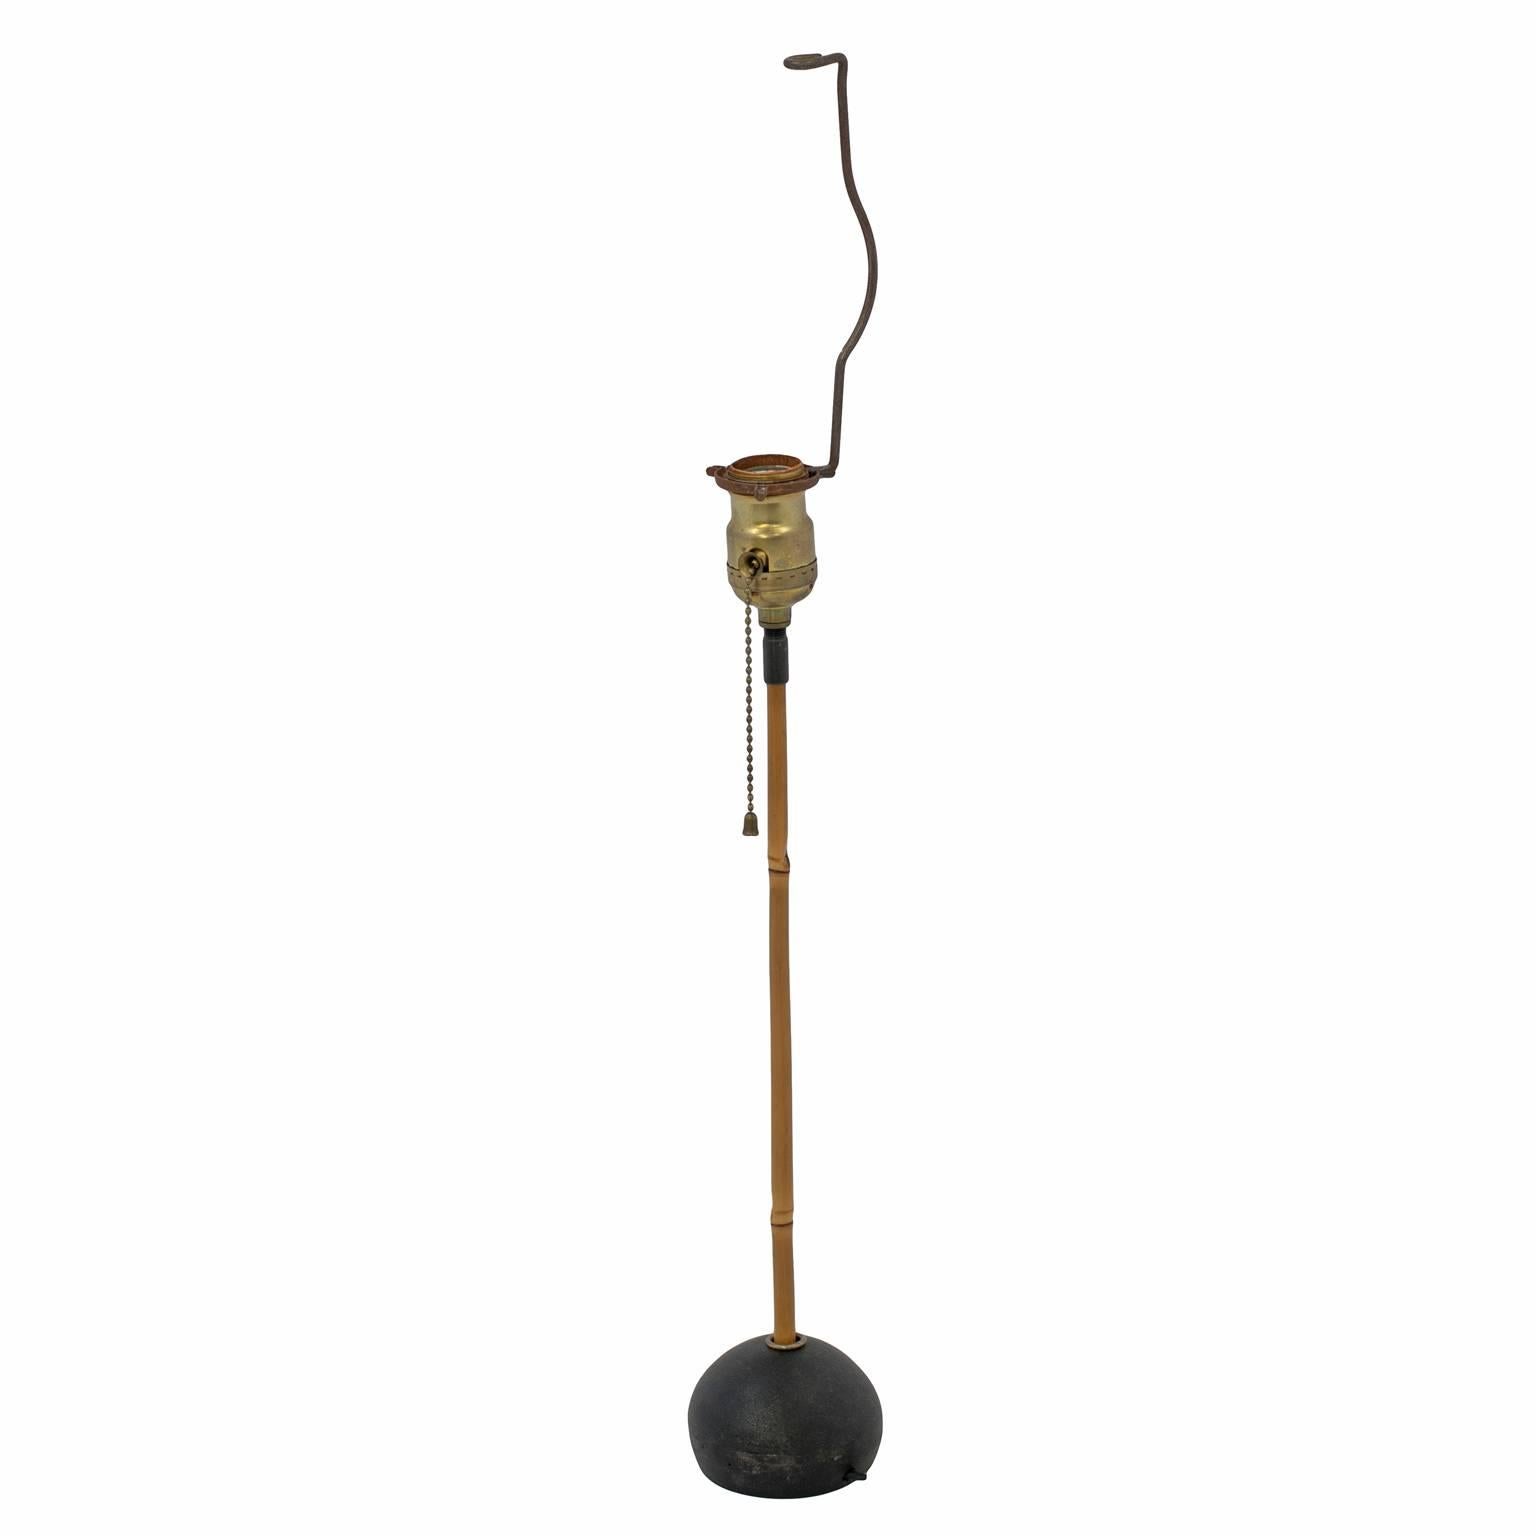 Vintage Isamu Noguchi table lamp, considered an icon of modern design. The vintage base features a bamboo pole on a black cast iron orb that is marked “Japan”. The lantern is an authentic, handmade replacement from Noguchi’s original manufacturer in